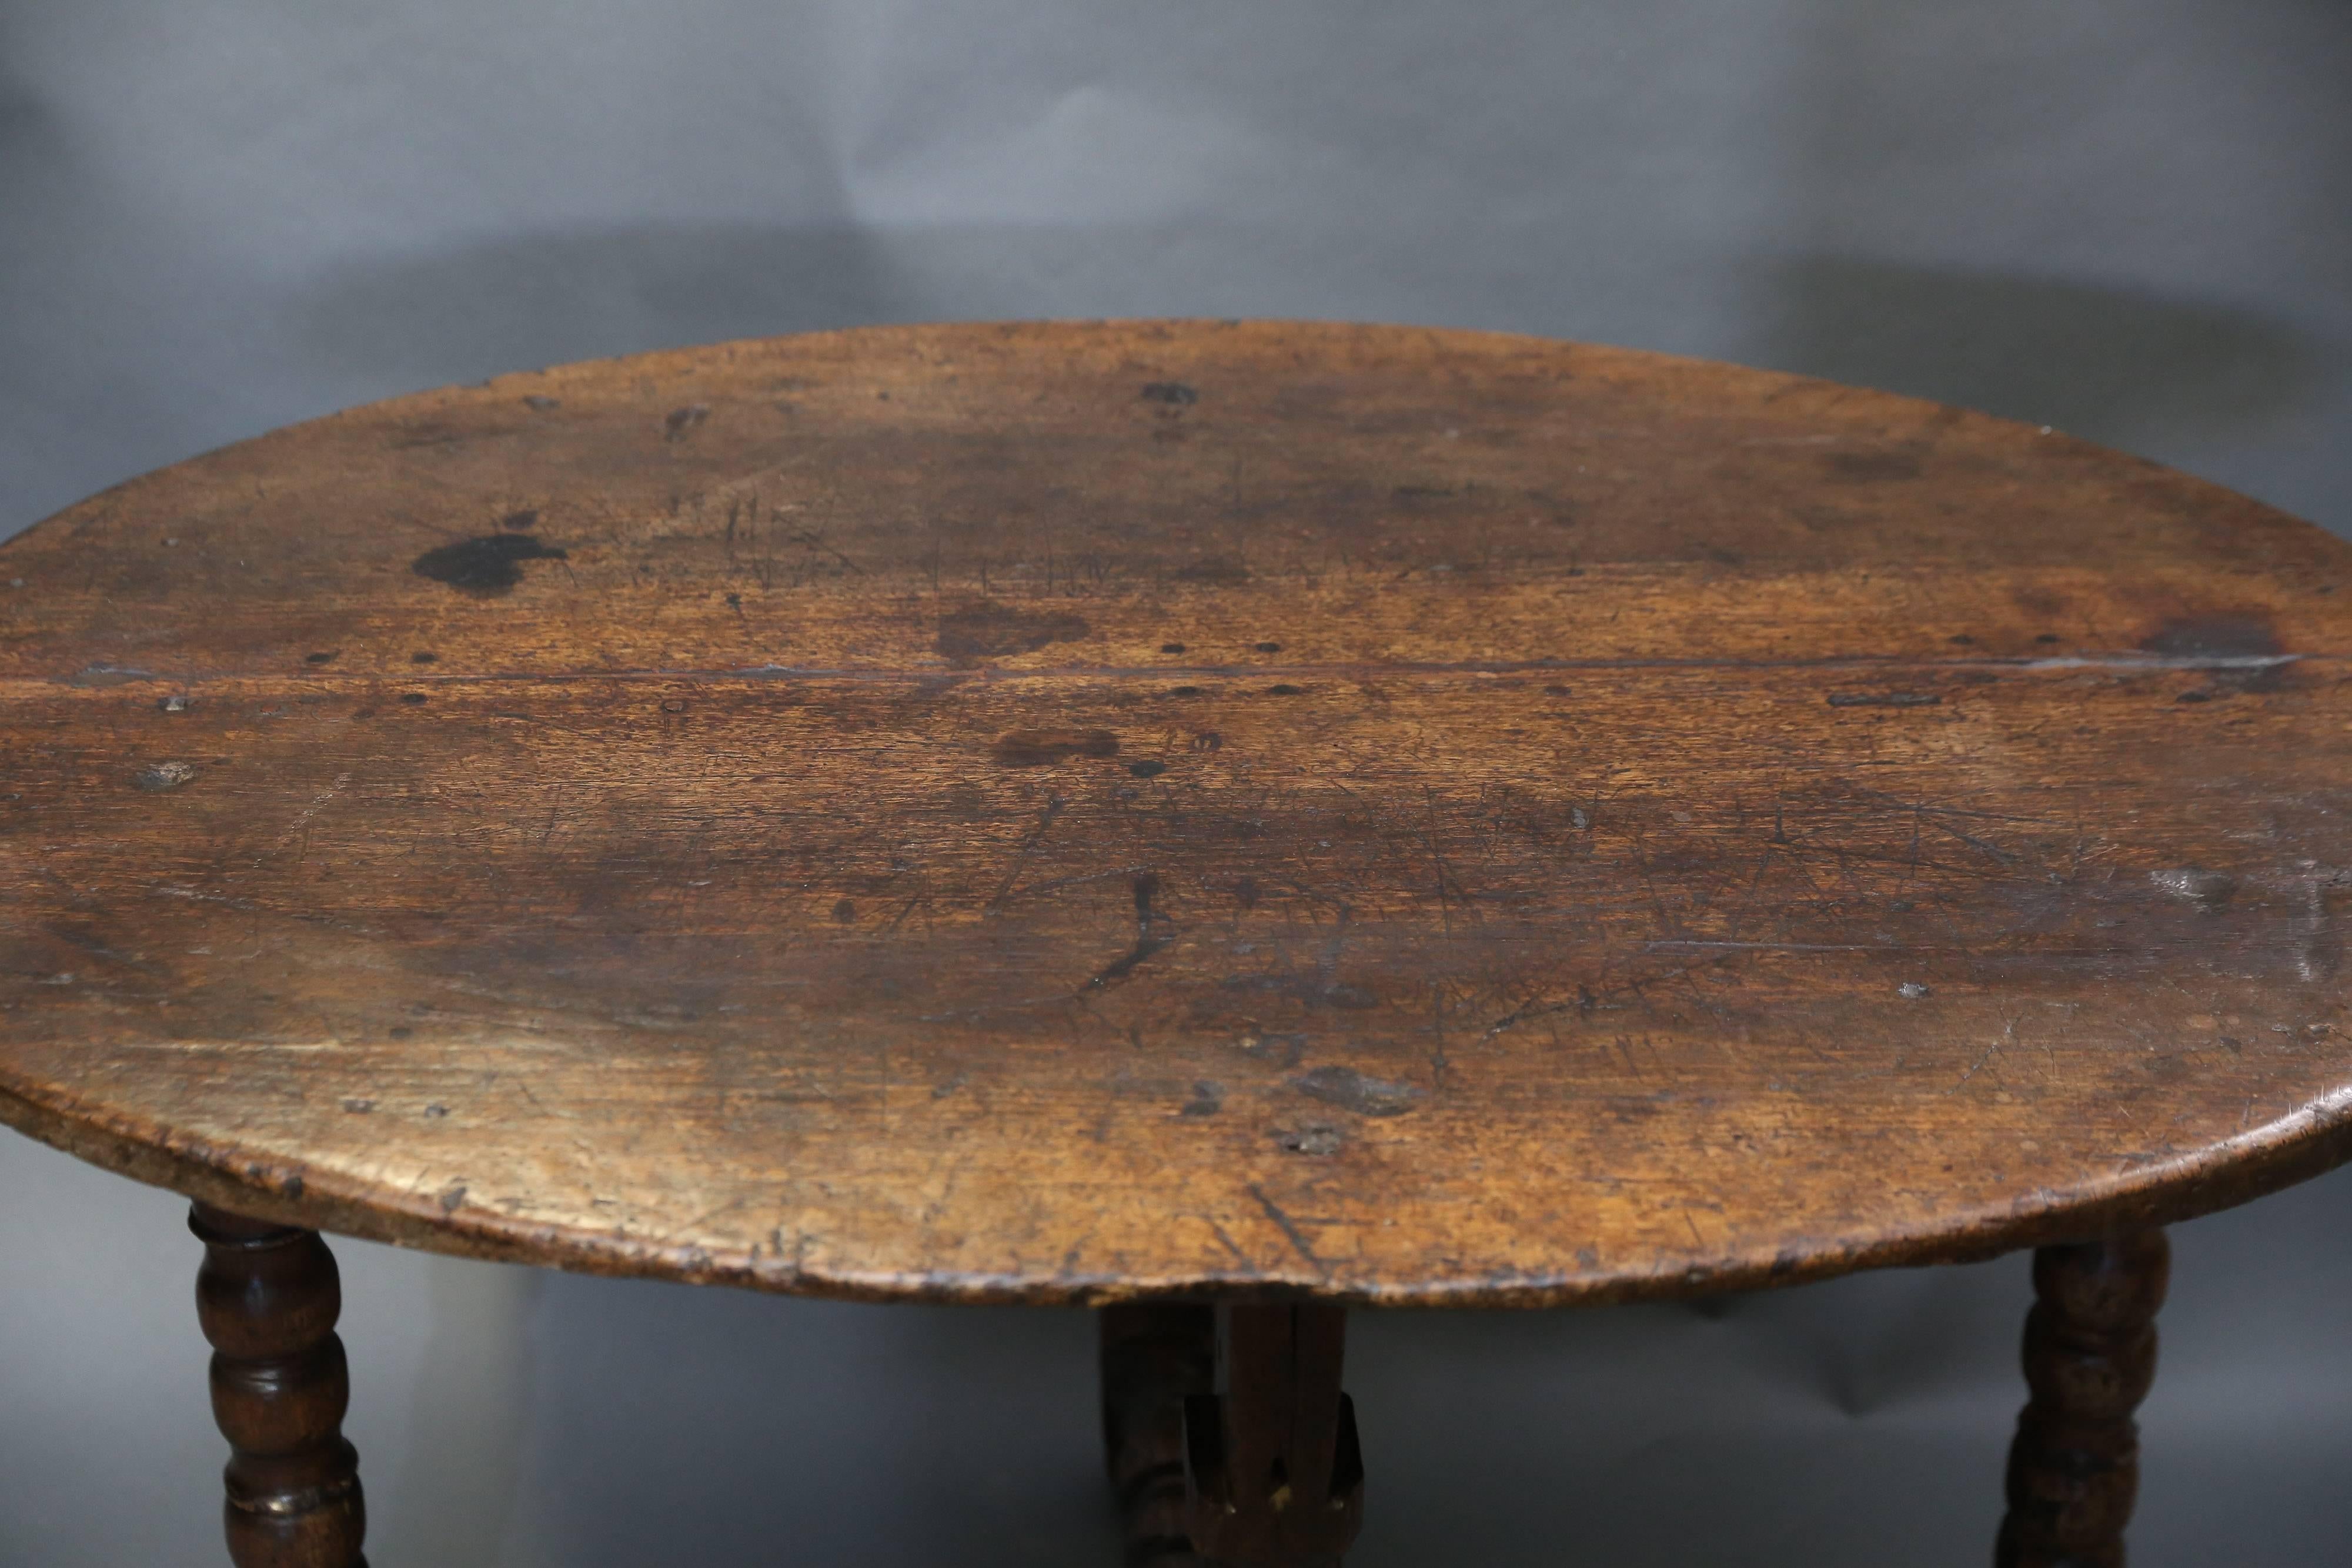 18th century oval wooden table with beautiful carved base. Pictures do not do justice to the patina. Edge of table only achieved through decades of use.